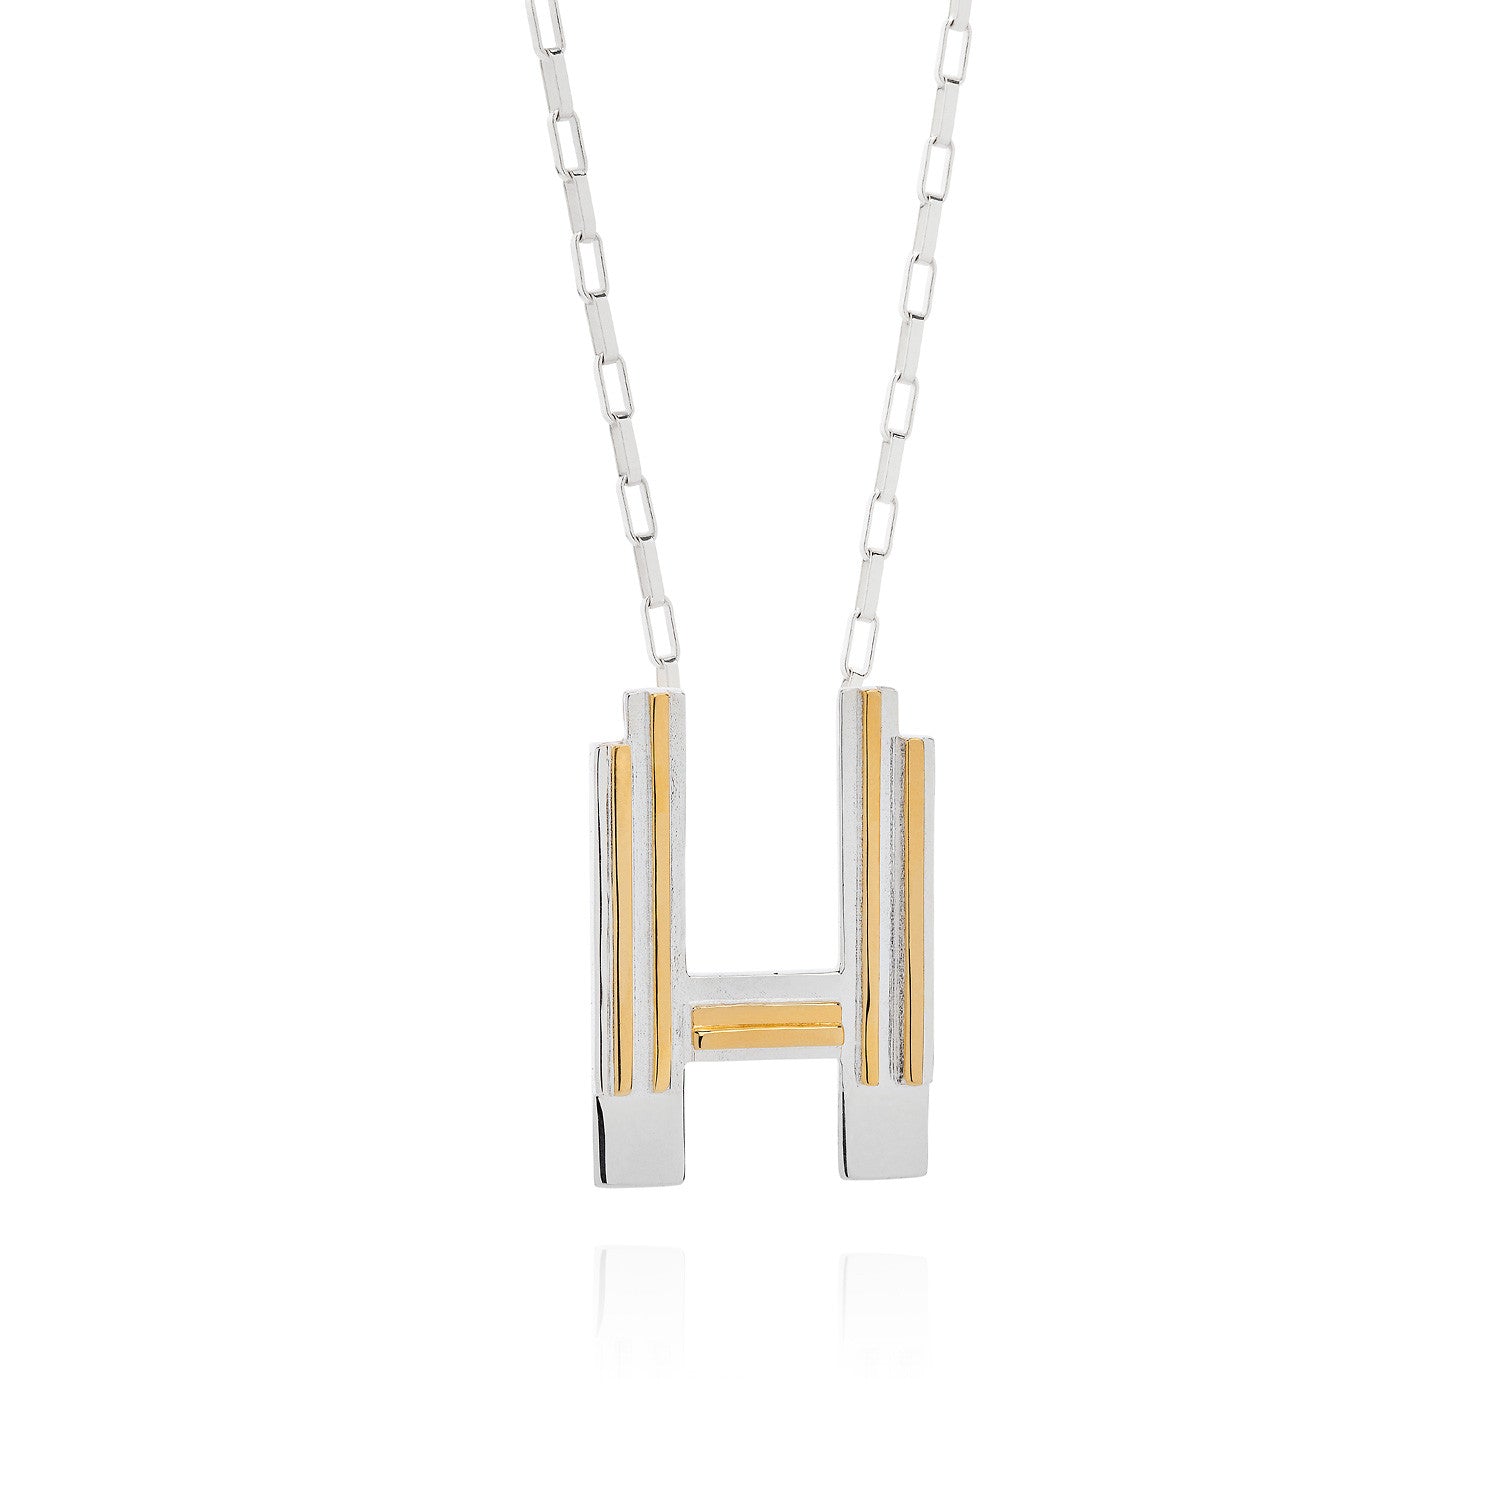 letter Initial Necklaces